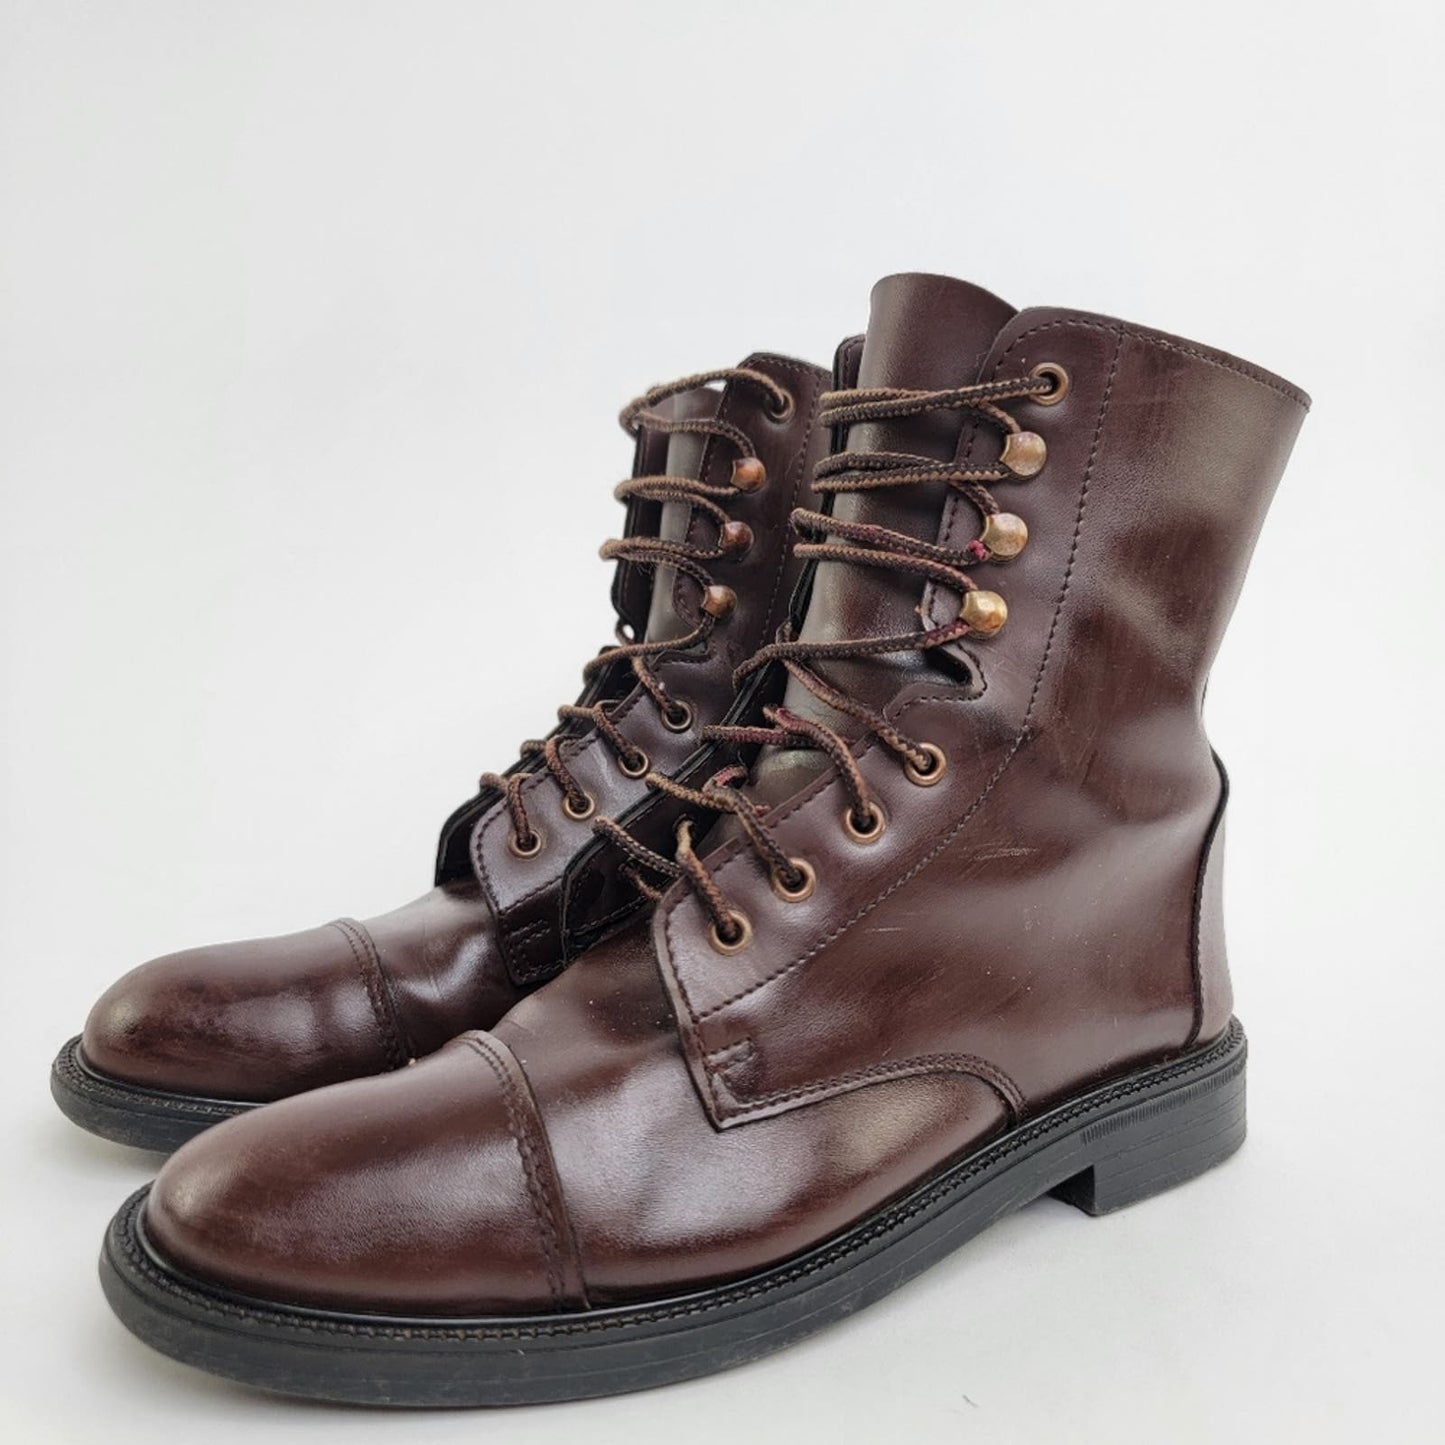 Vintage 90s Brown Leather Capped Toe Cottage Boots - 6